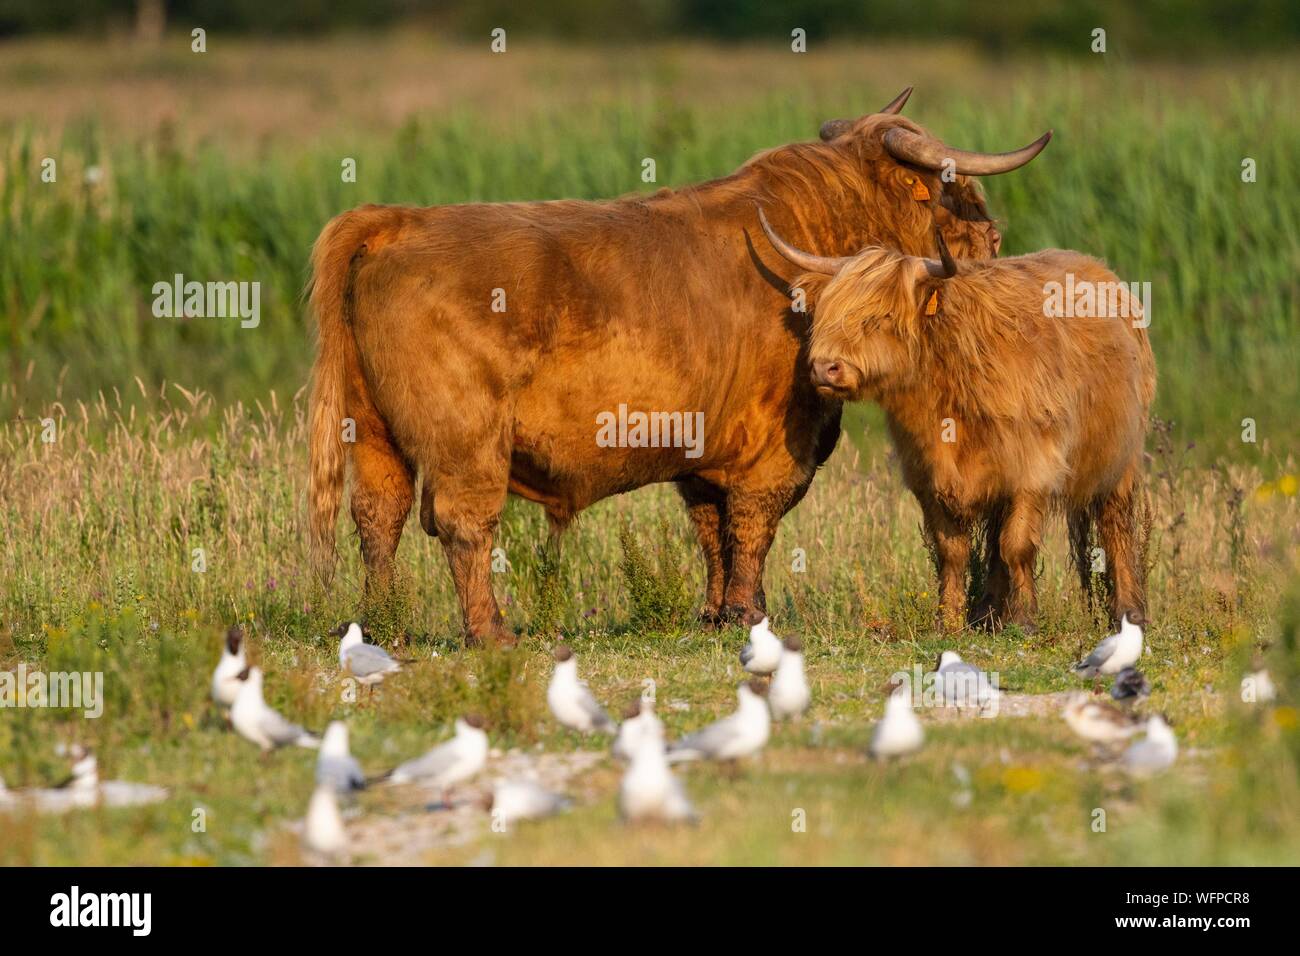 France, Somme, Somme Bay, Crotoy Marsh, Le Crotoy, Highland Cattle (Scottish cow) for marsh maintenance and eco grazing Stock Photo